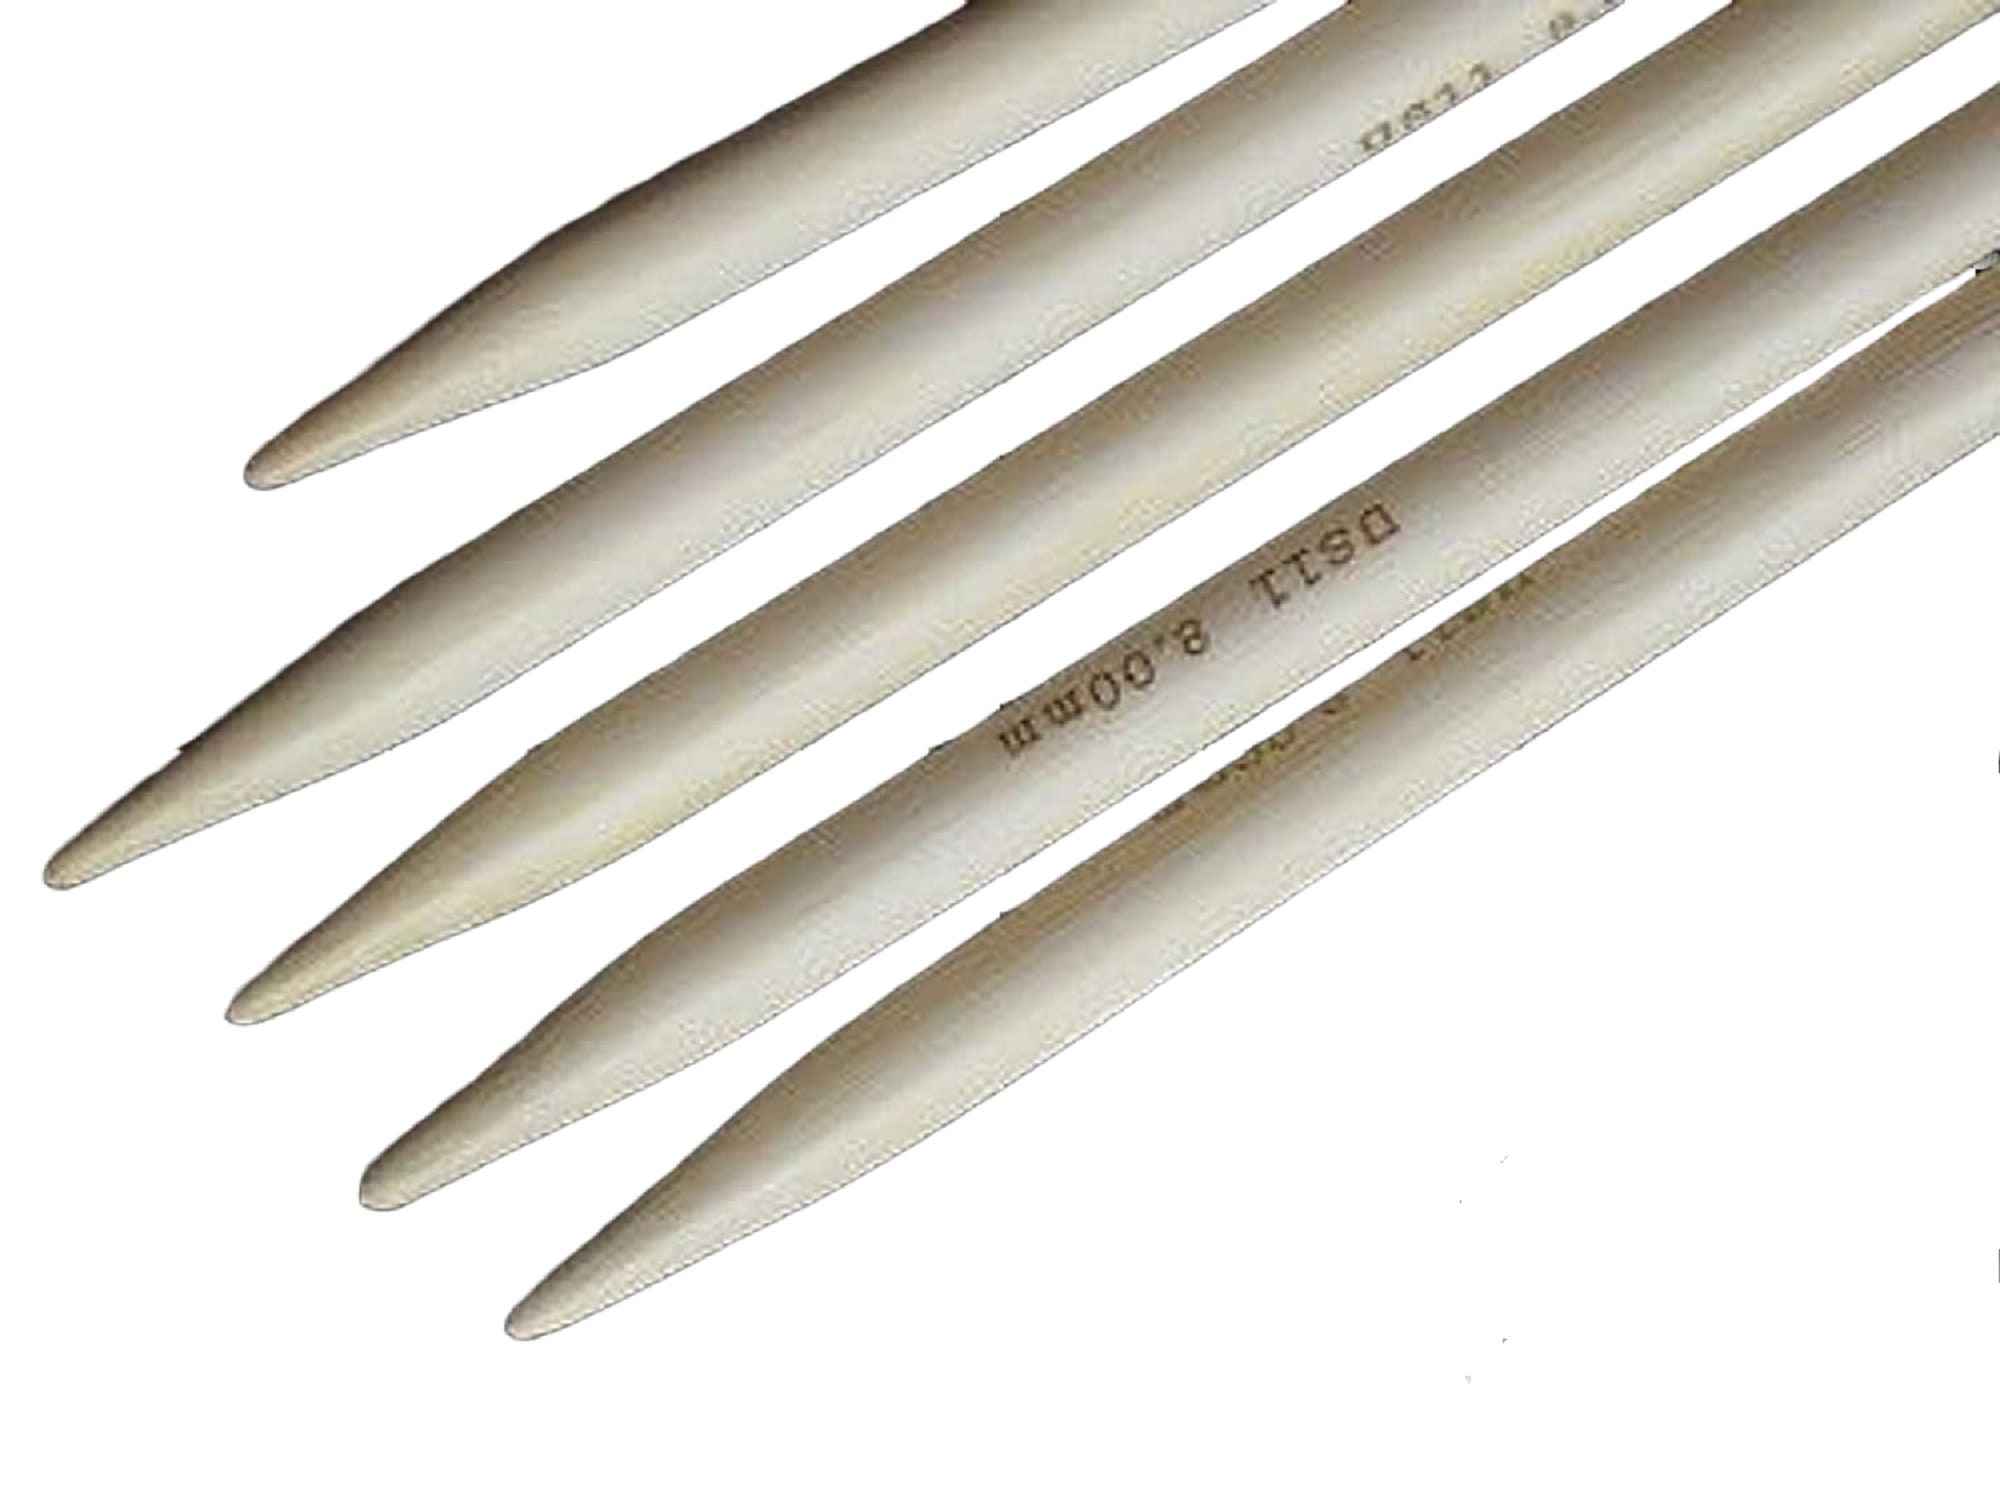 Drops 5 Inches Interchangeable Knitting Needles Set Metal Size Us4